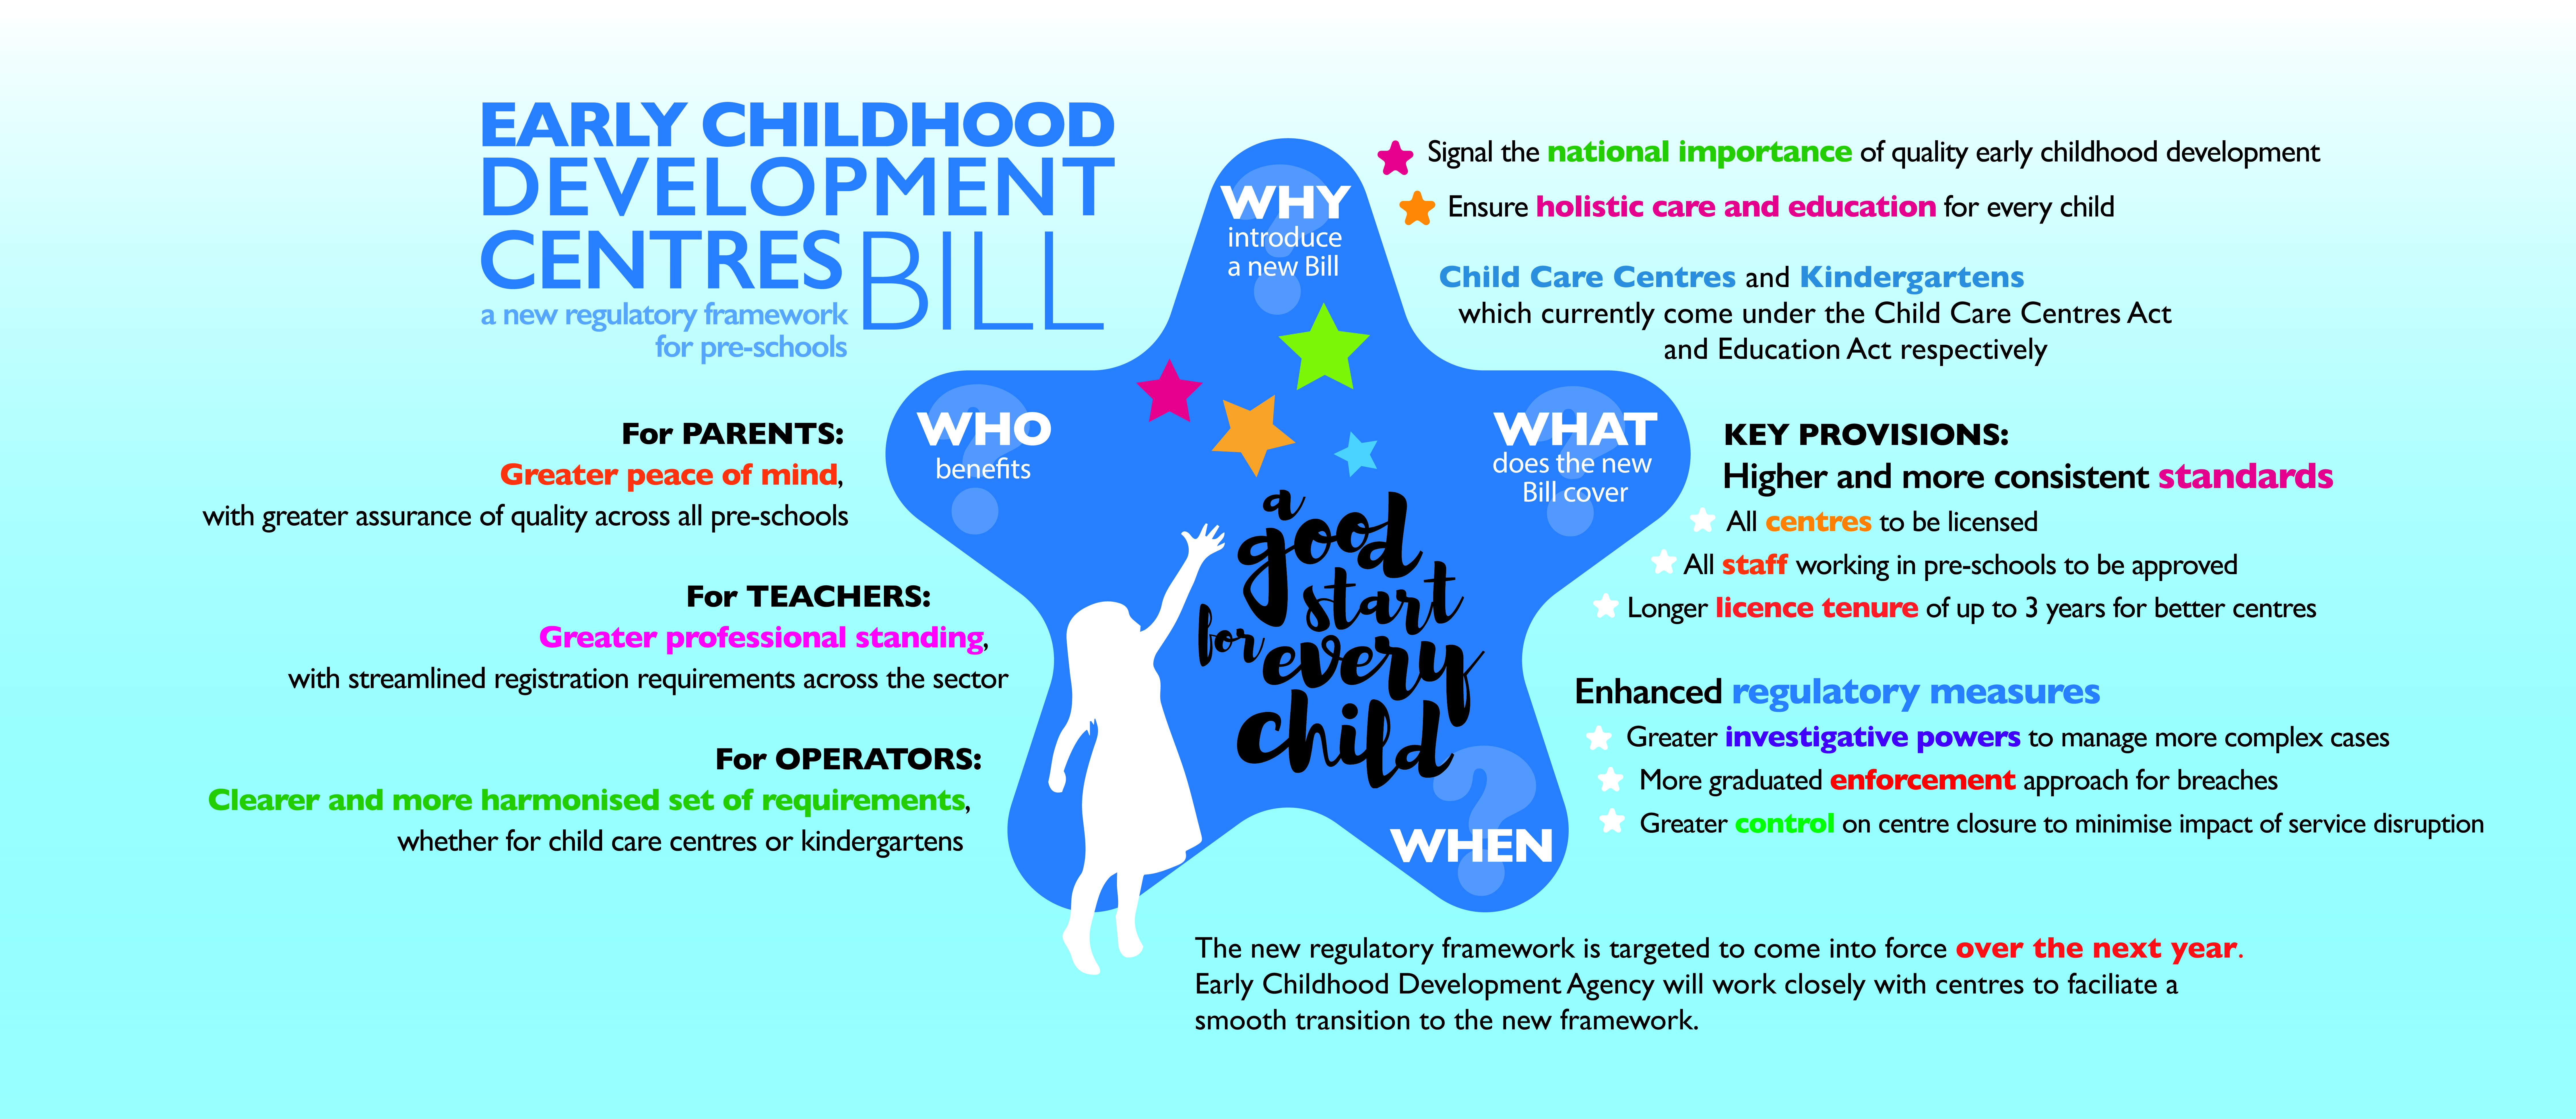 NEW EARLY CHILDHOOD DEVELOPMENT CENTRES BILL PASSED IN PARLIAMENT TO RAISE QUALITY OF PRE-SCHOOL SECTOR CHILD CARE CENTRES